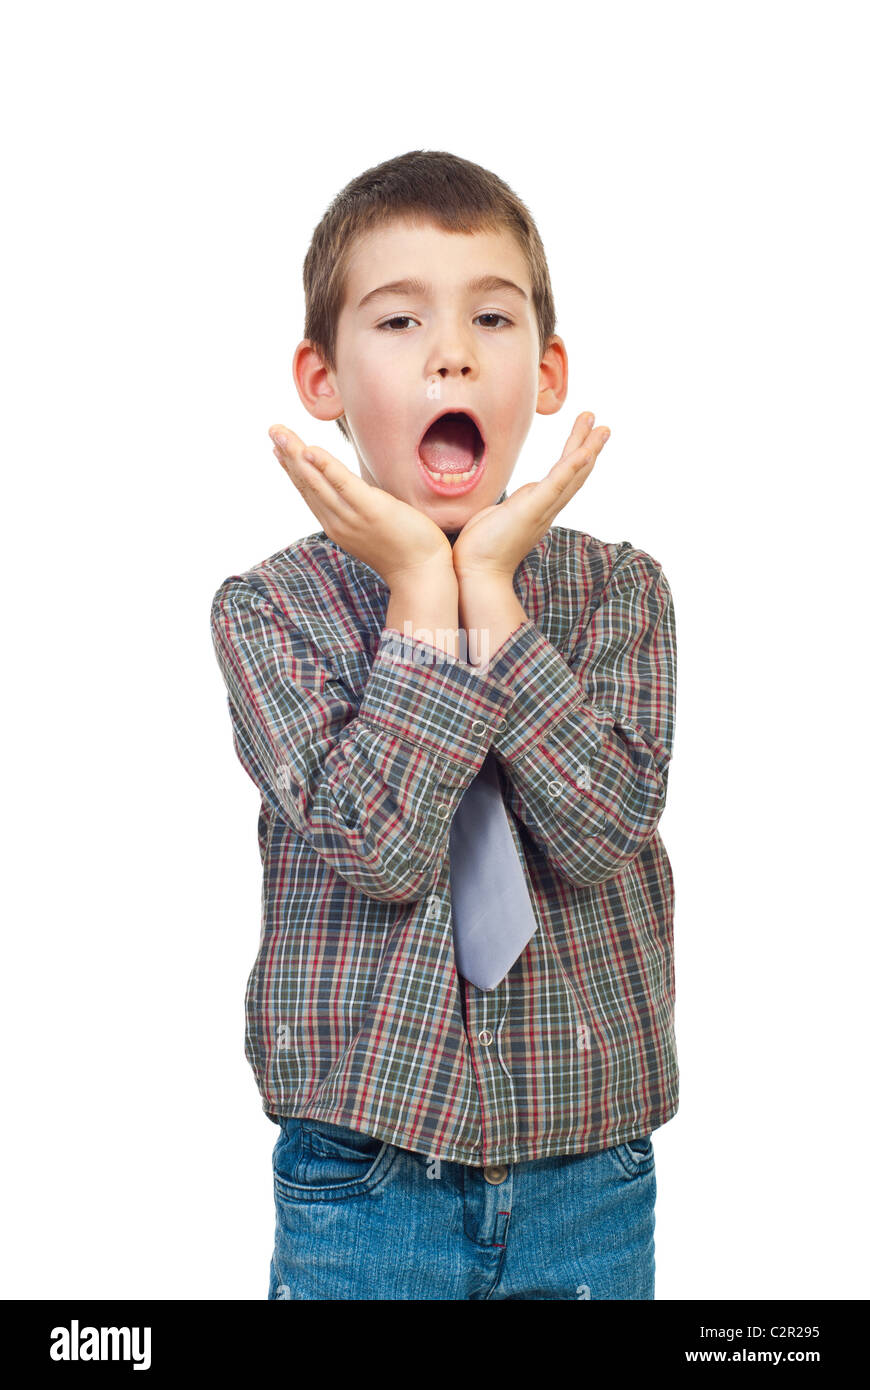 Scared and surprised six years old boy holding hands up to face and shouting isolated on white background Stock Photo